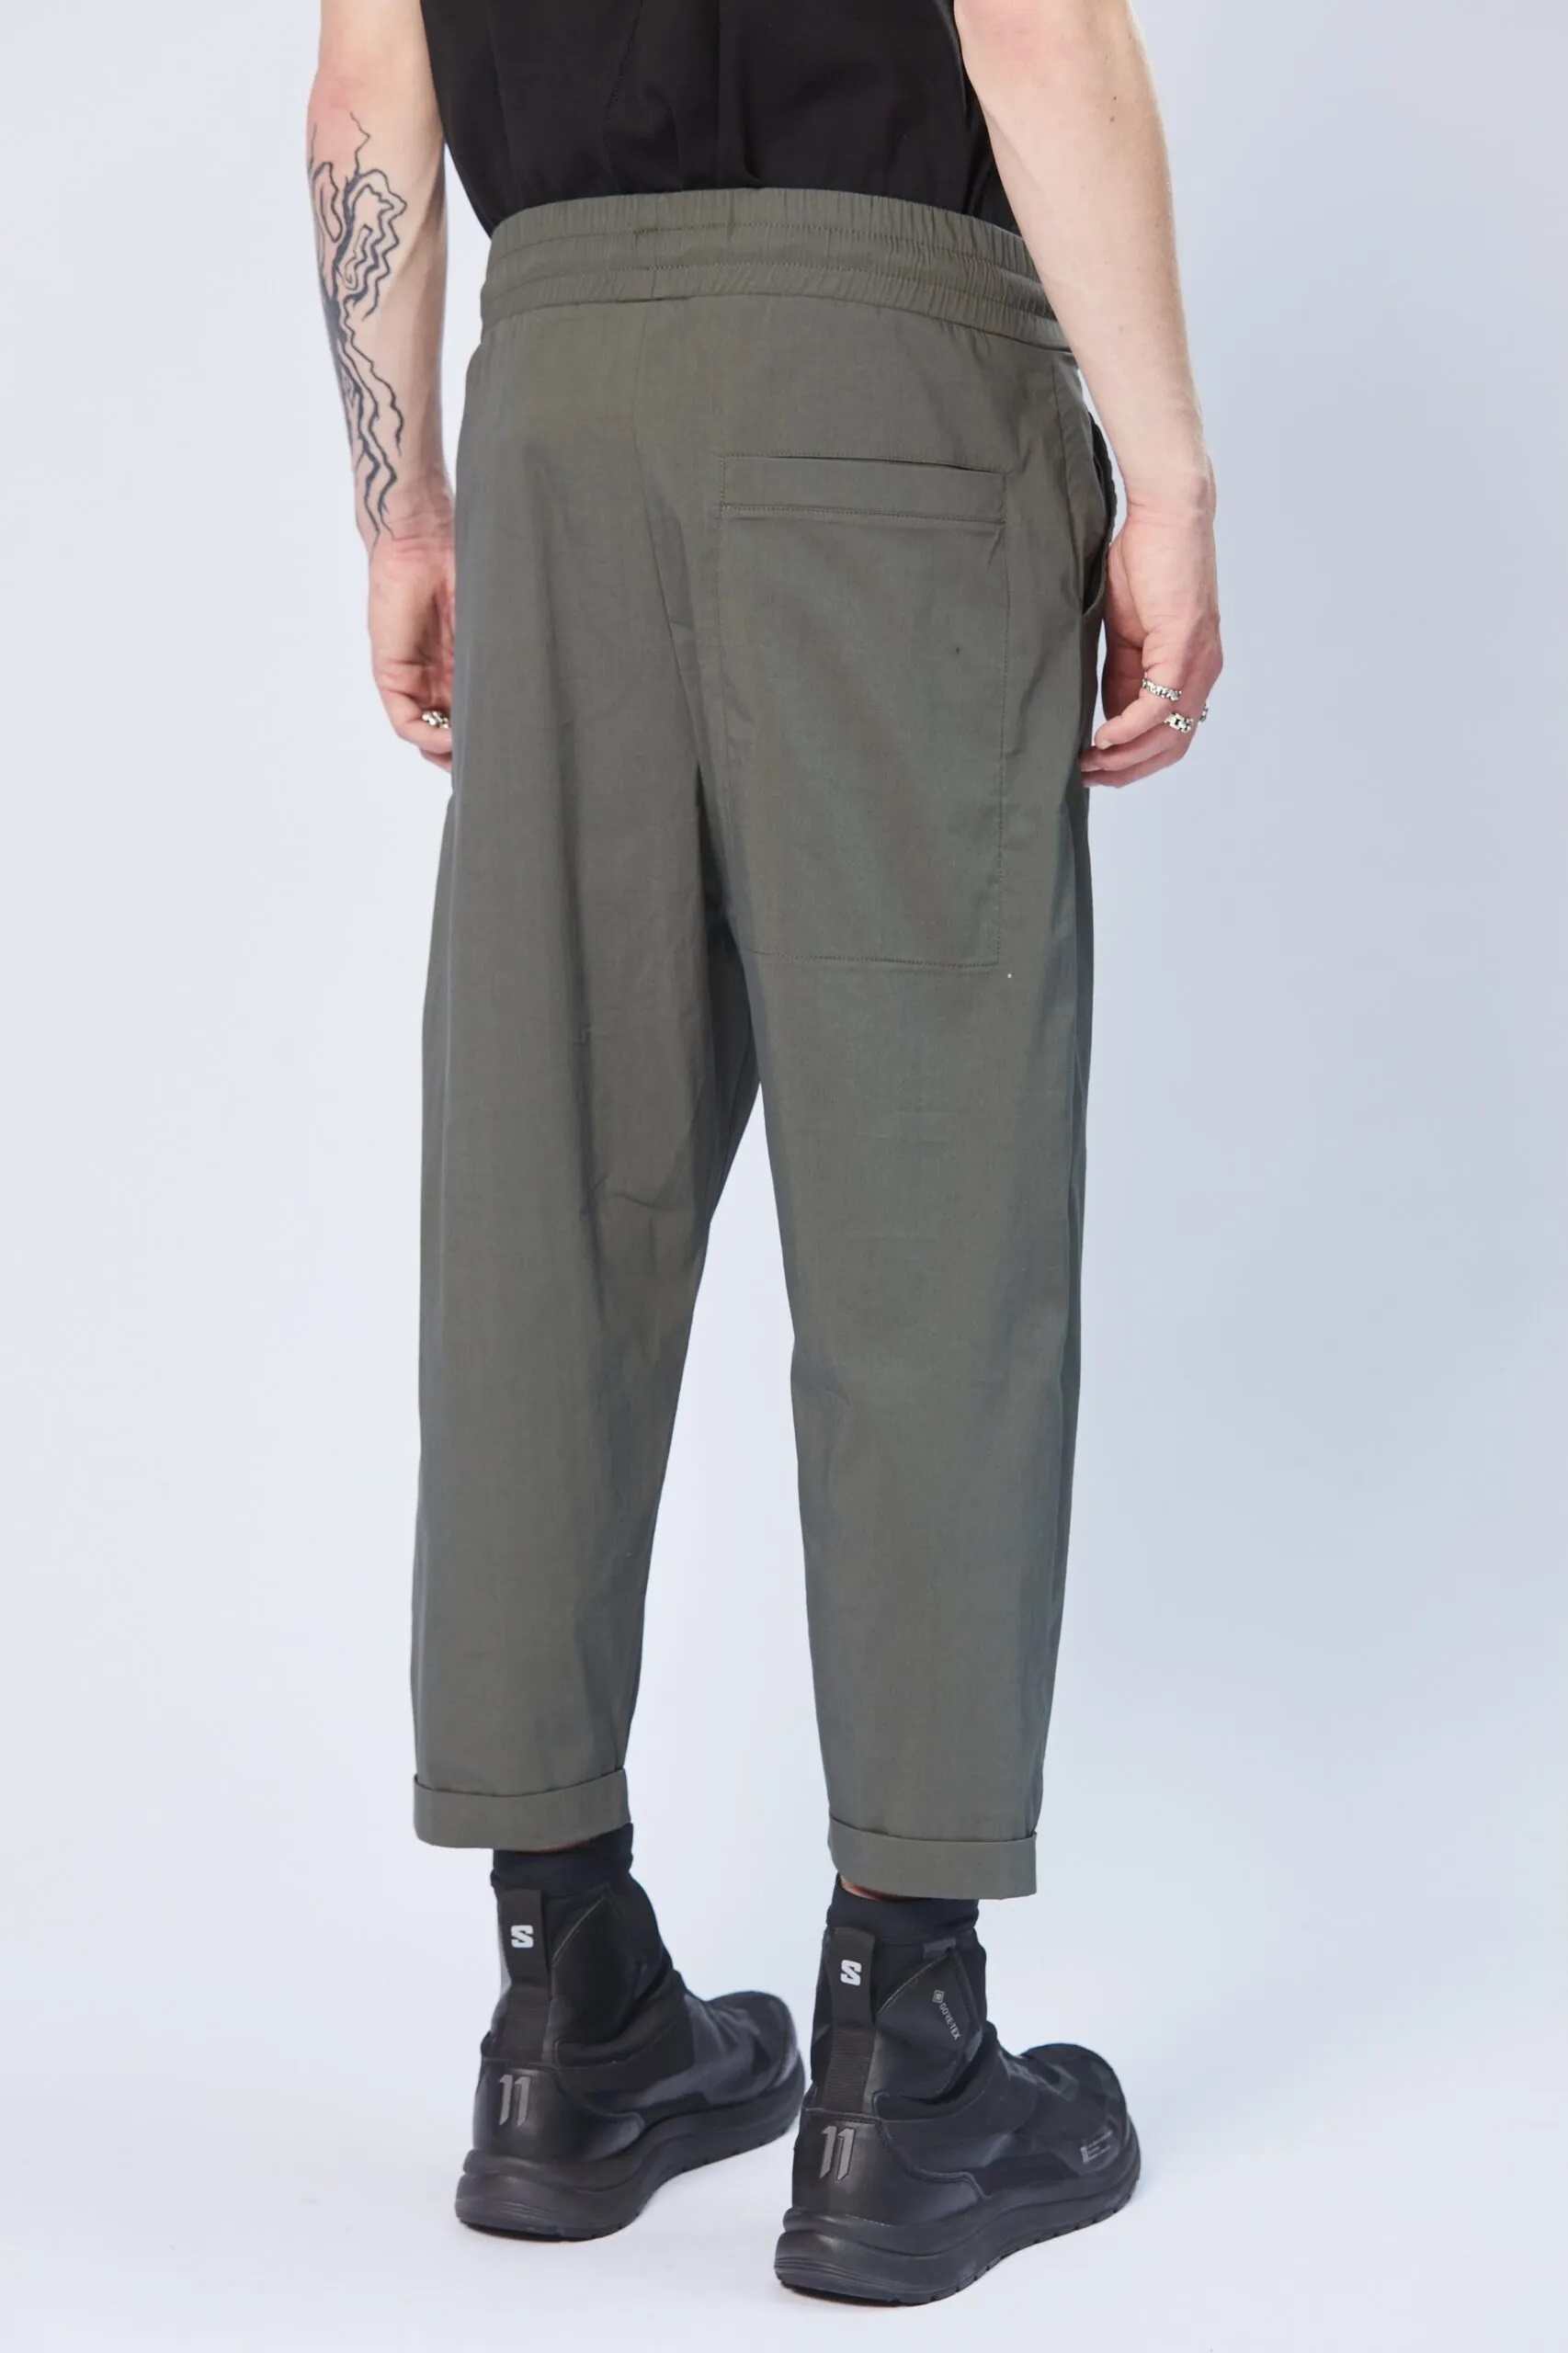 THOM KROM Pant in Ivy Green S